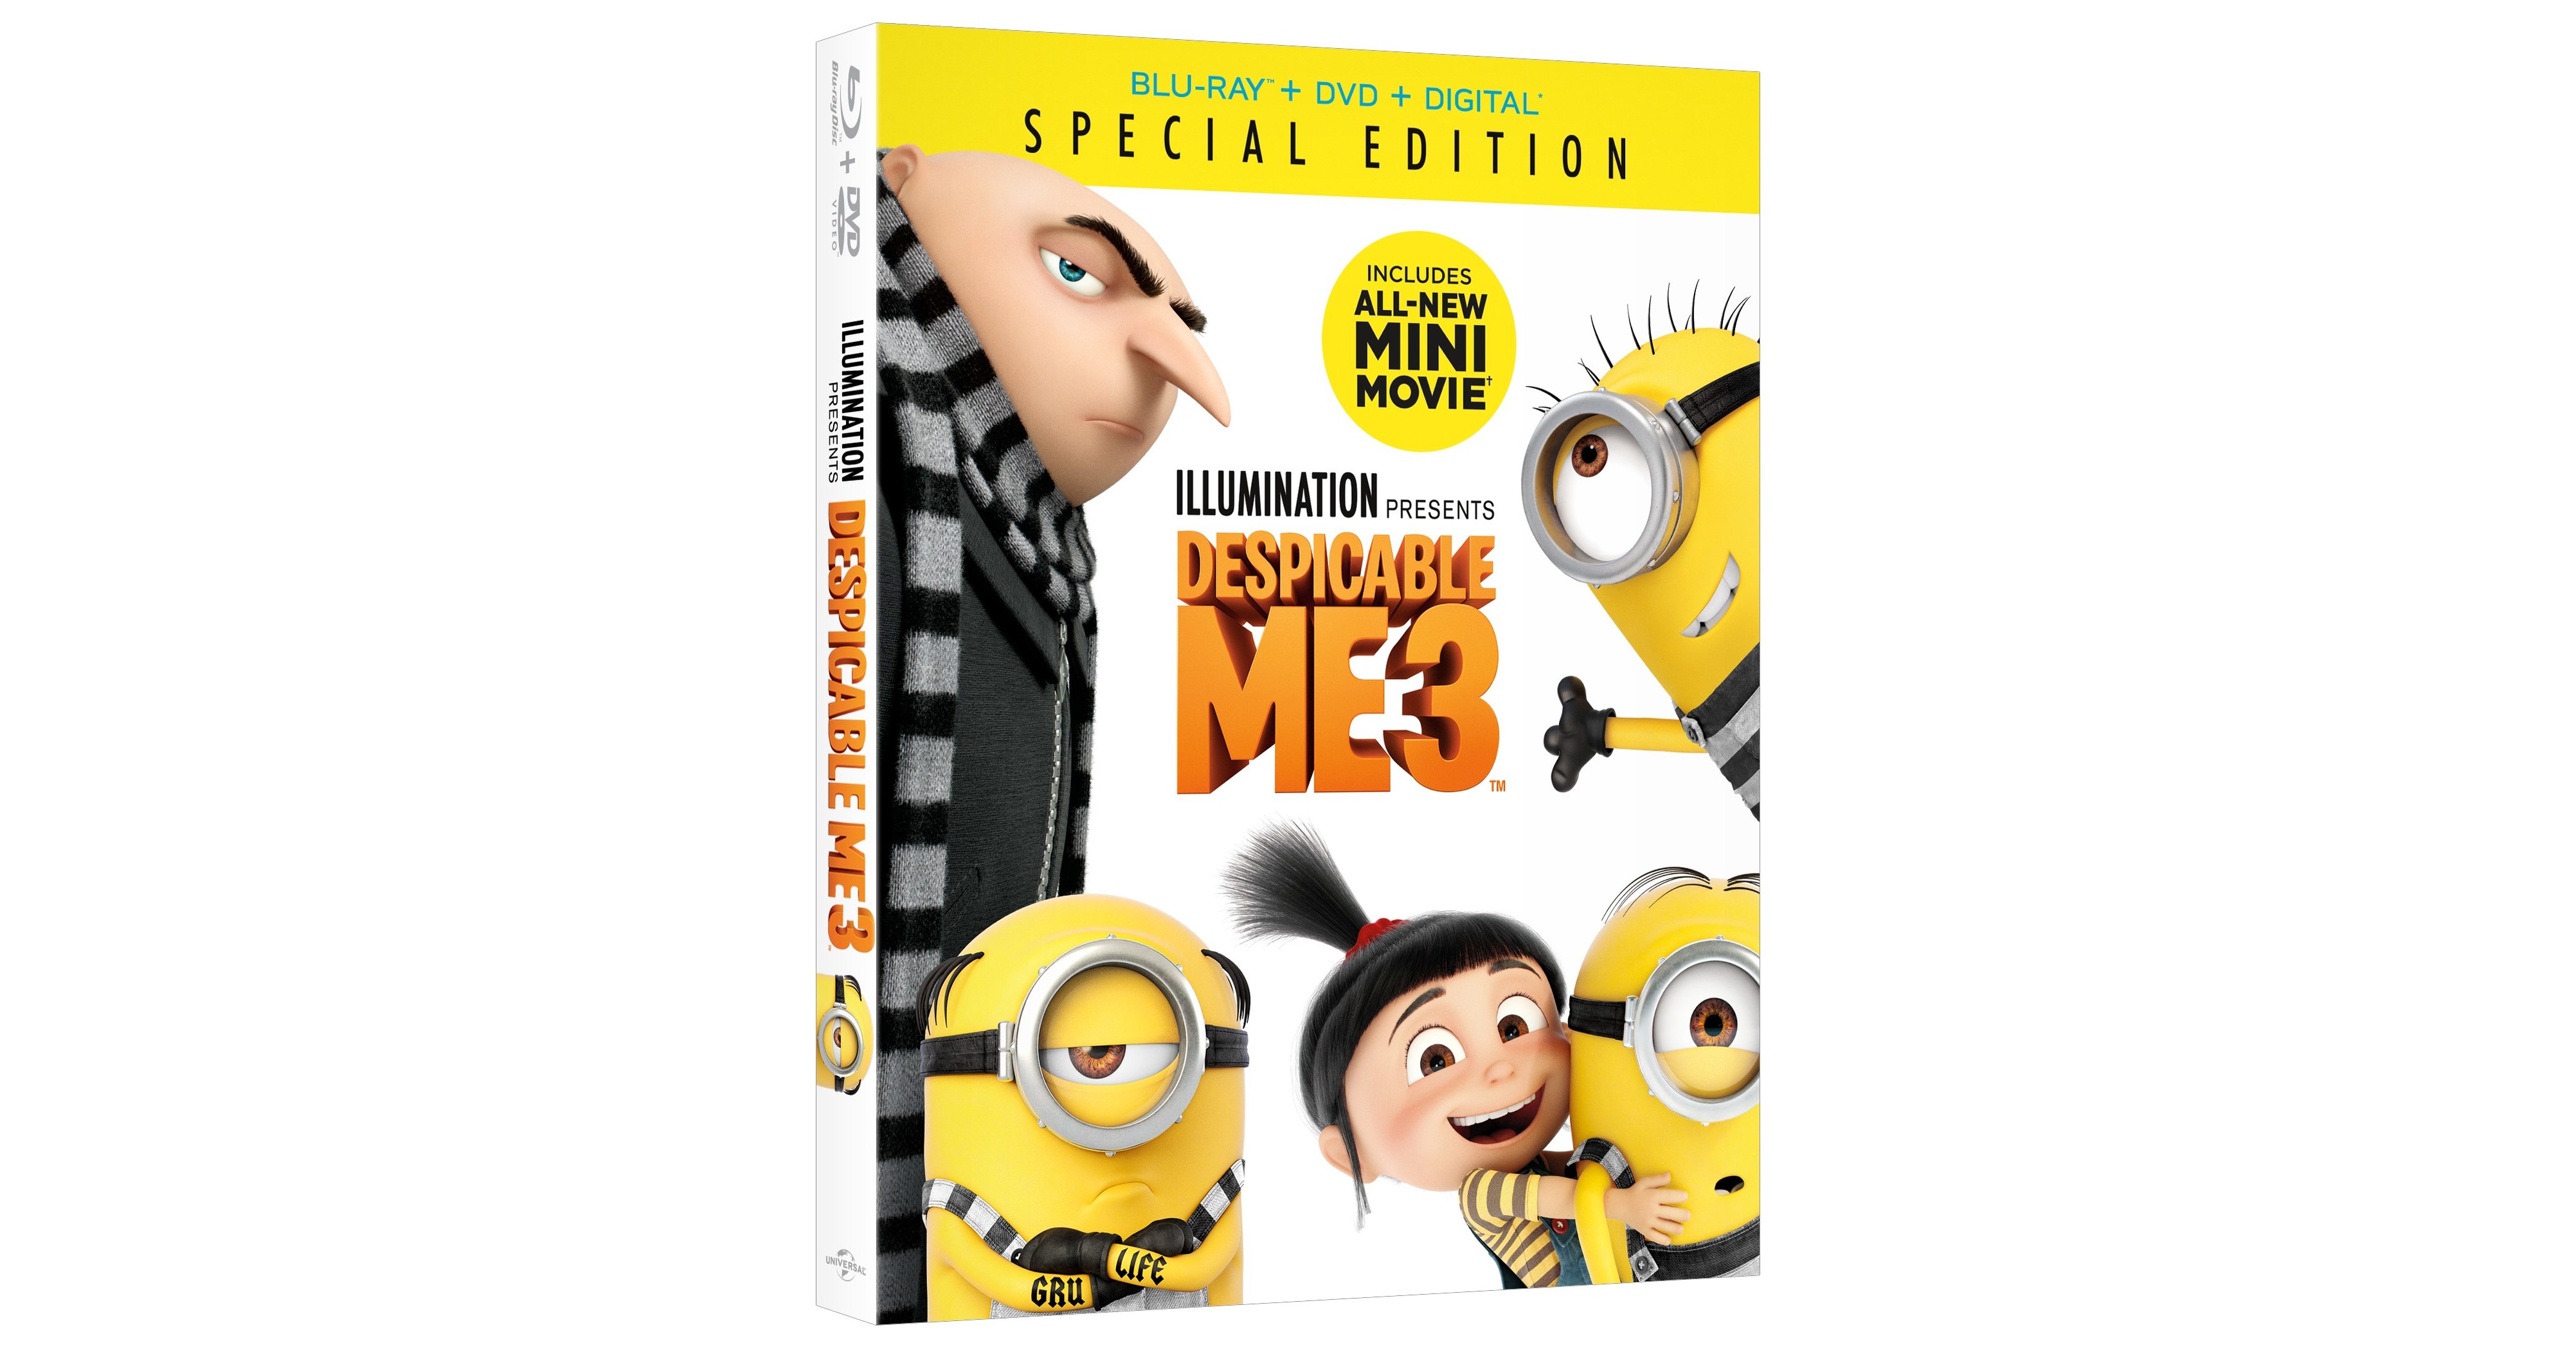 From Universal Pictures Home Entertainment Despicable Me 3